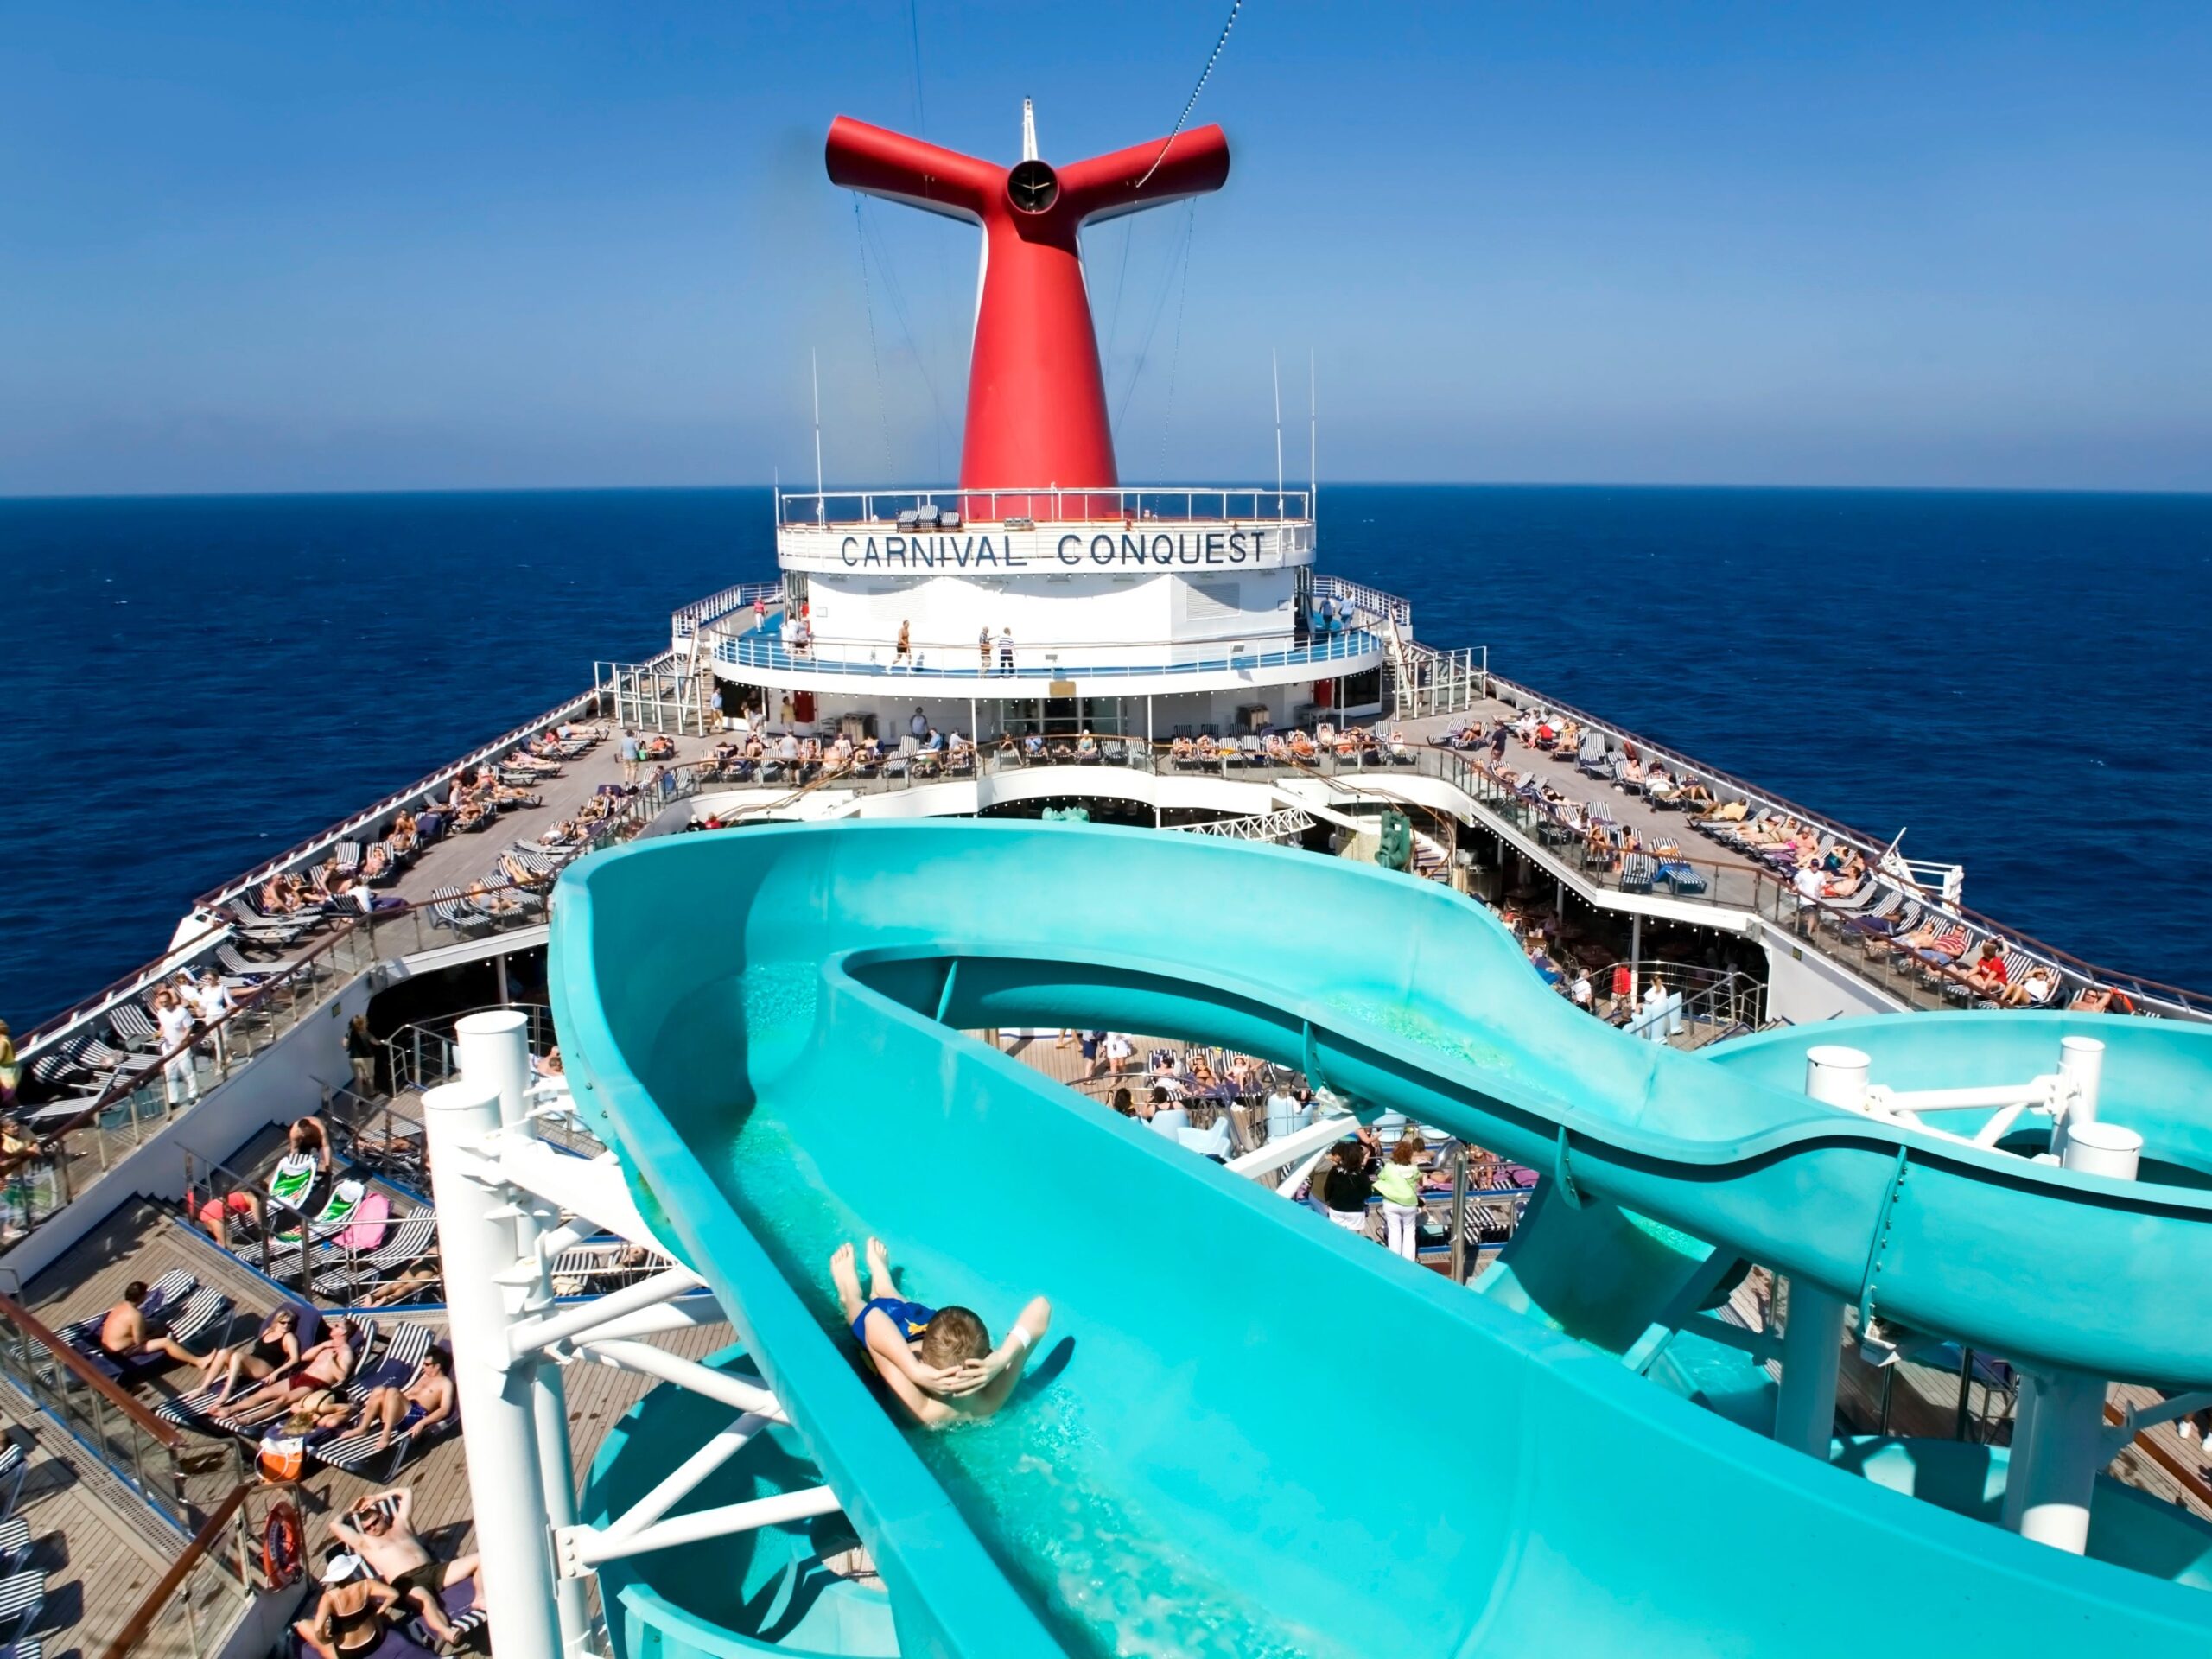 The water slide onboard the Carnival Conquest in 2007.